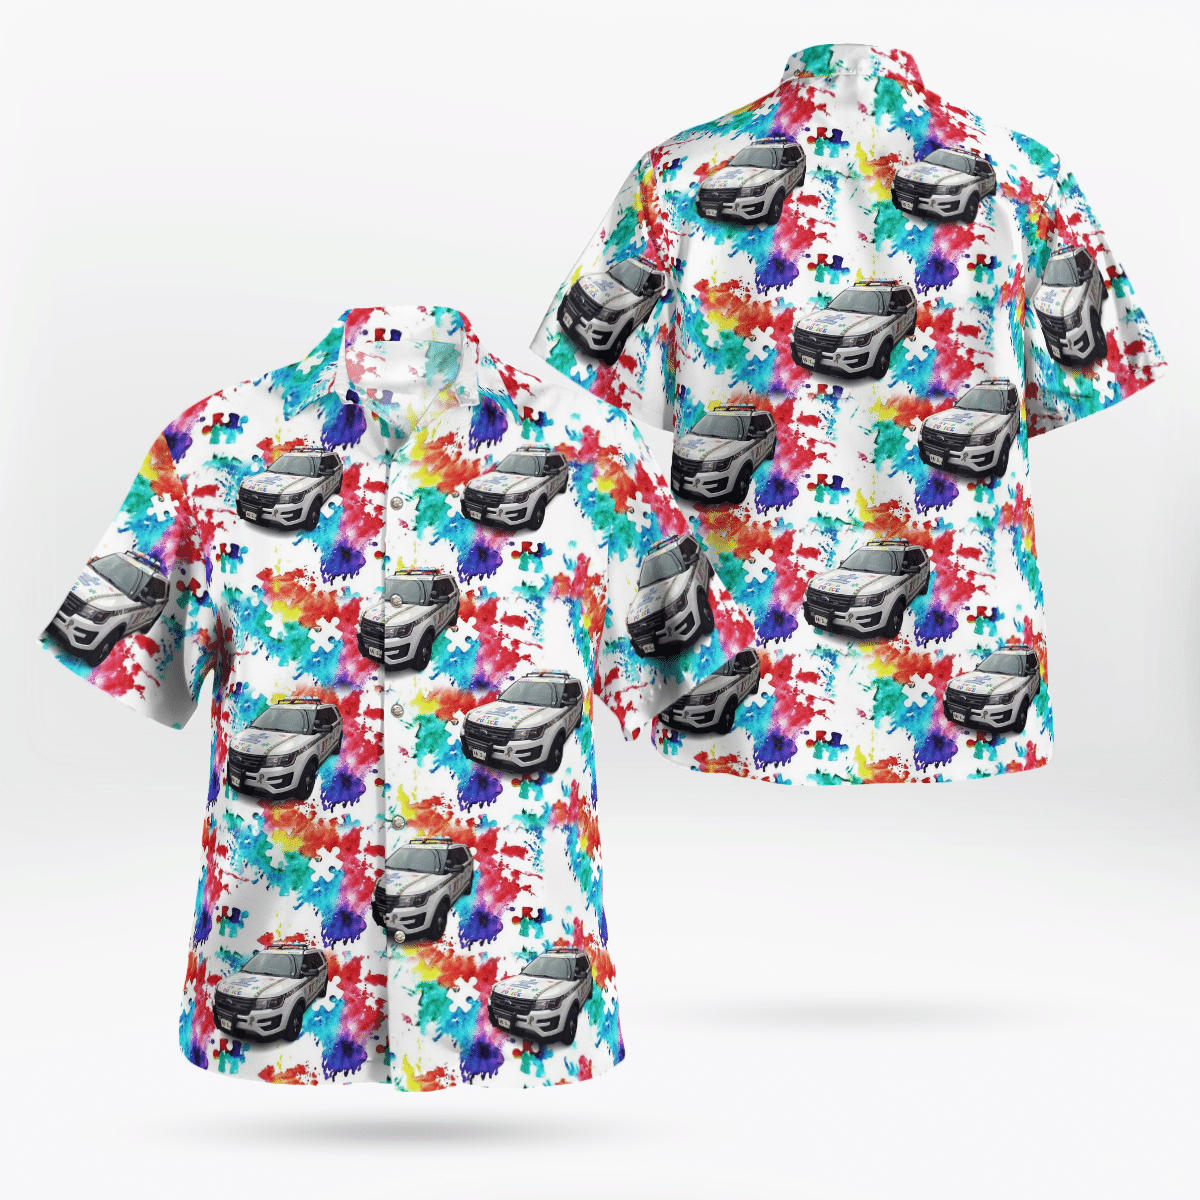 If you are in need of a new summertime look, pick up this Hawaiian shirt 15